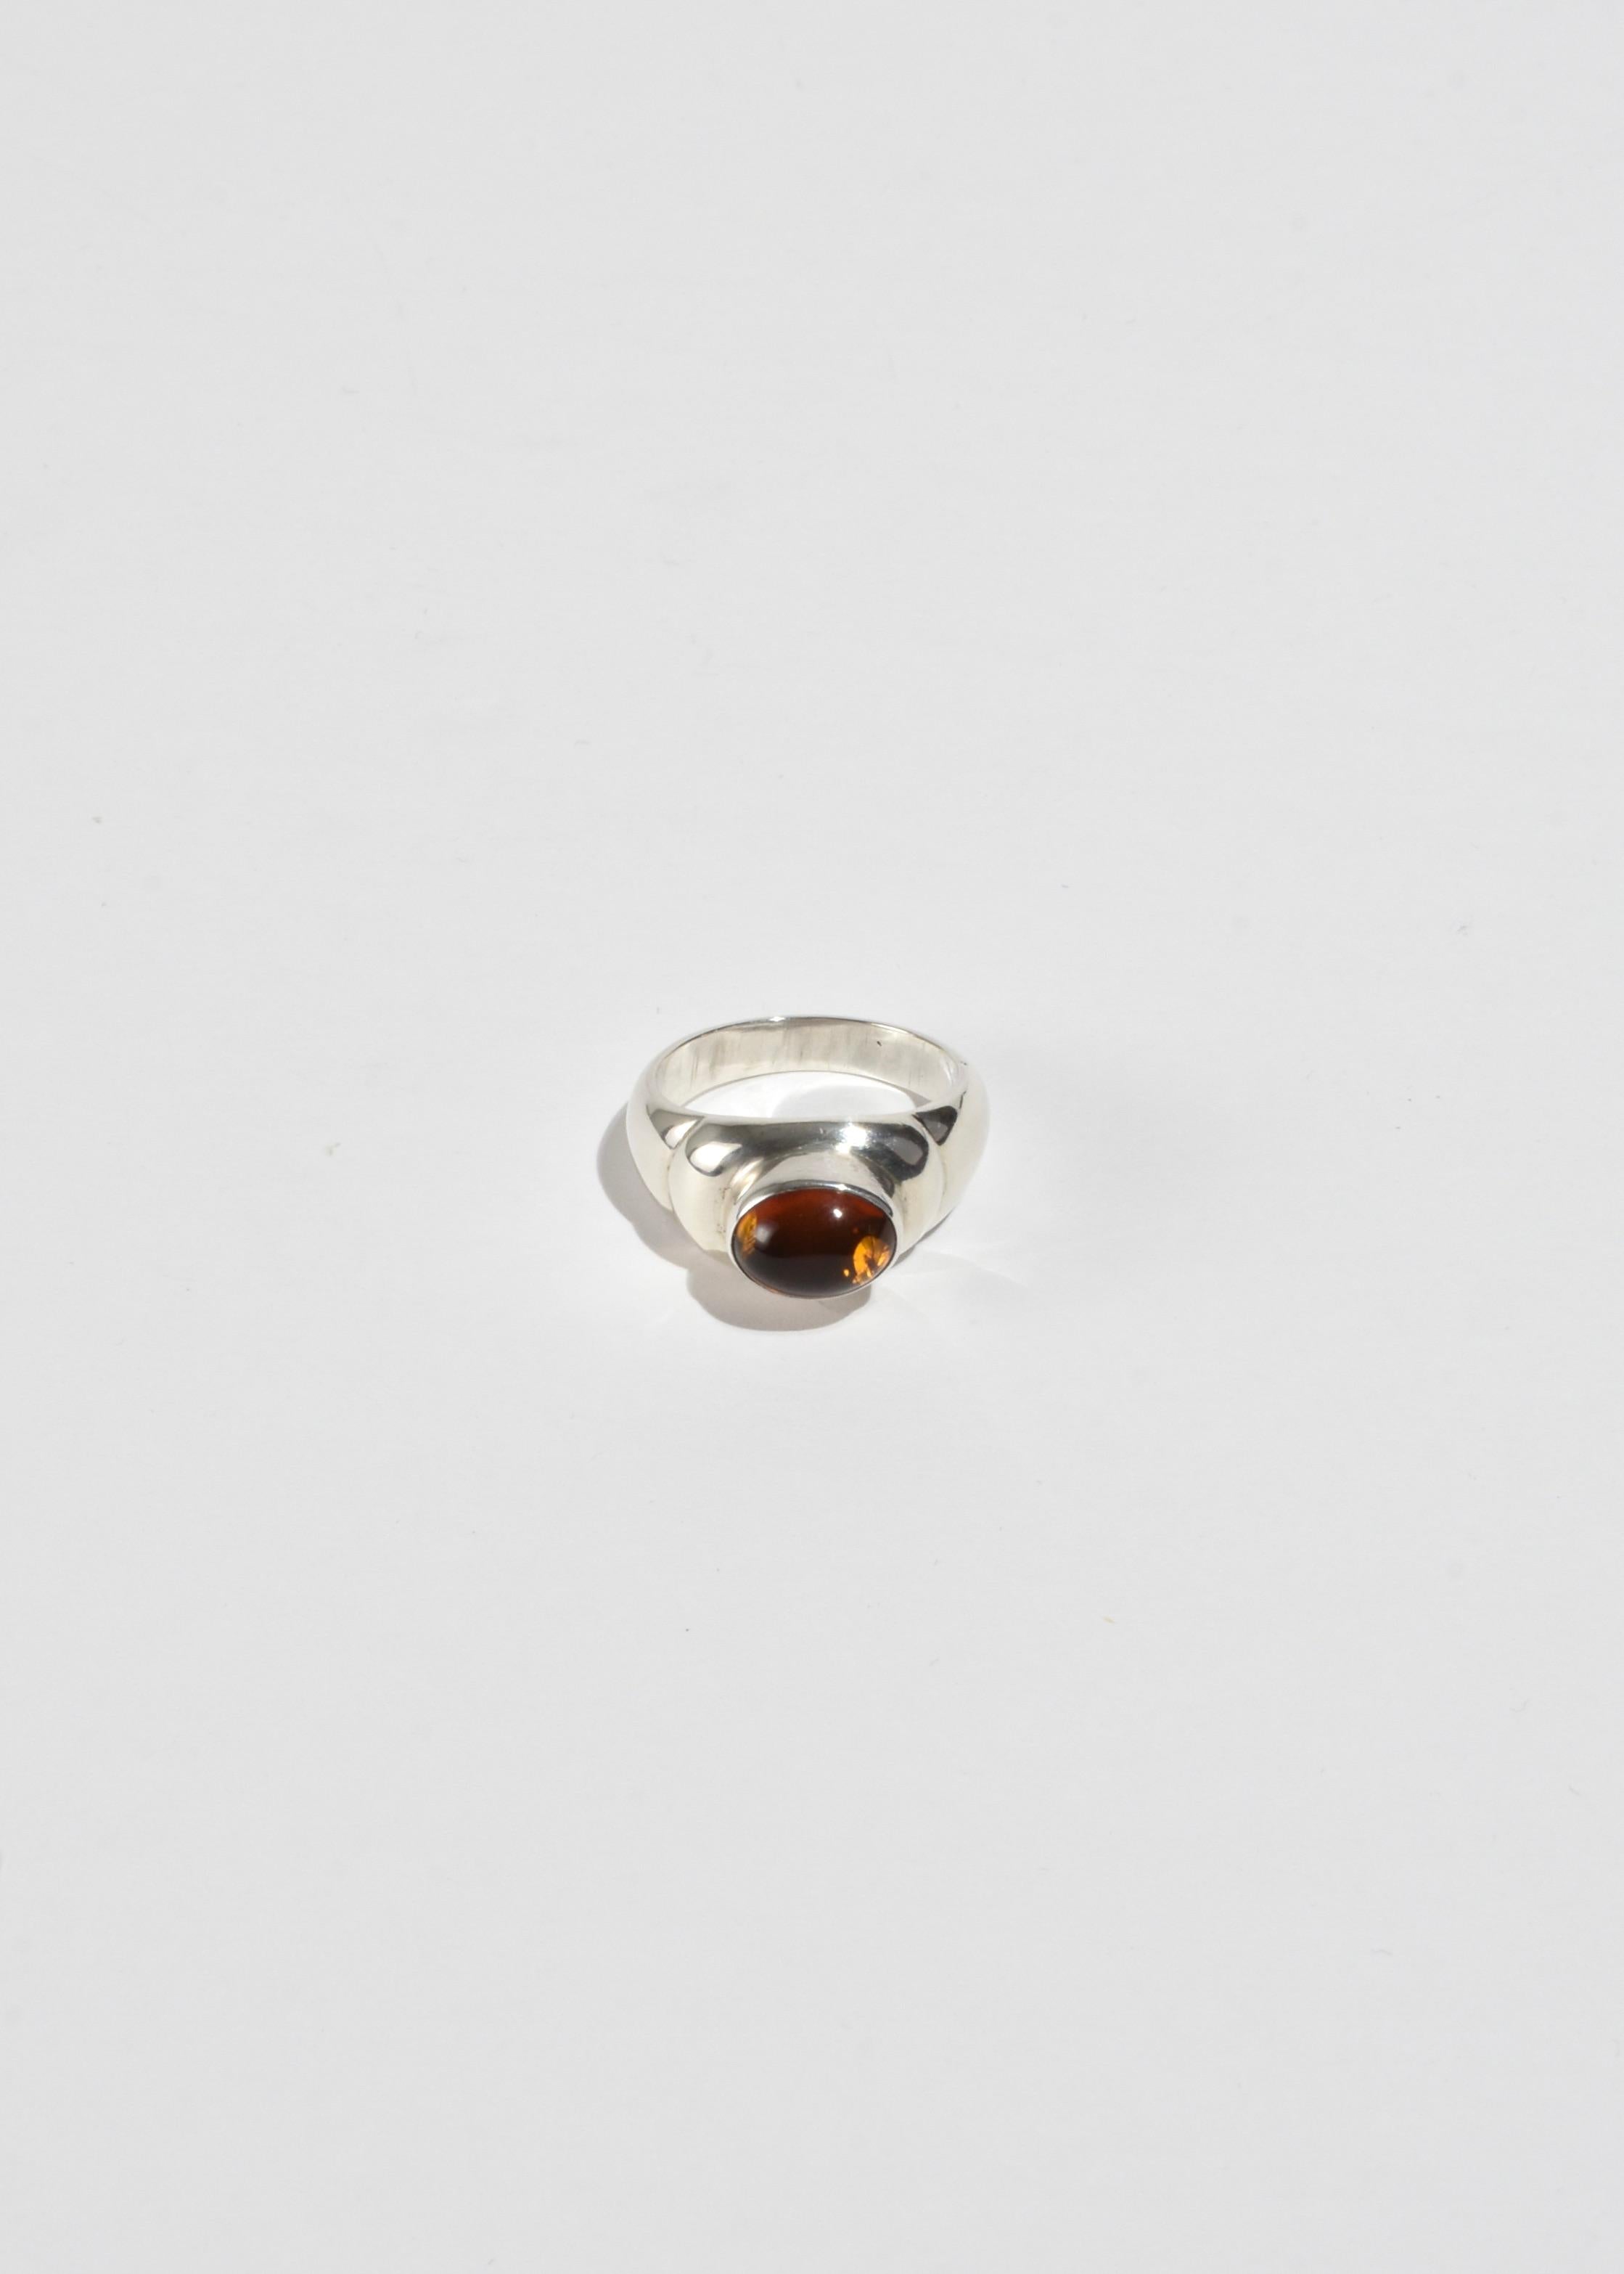 Vintage sterling ring with oval amber cabochon. Stamped 925.

Material: Sterling silver, amber.

We recommend storing in a dry place and periodic polishing with a cloth.